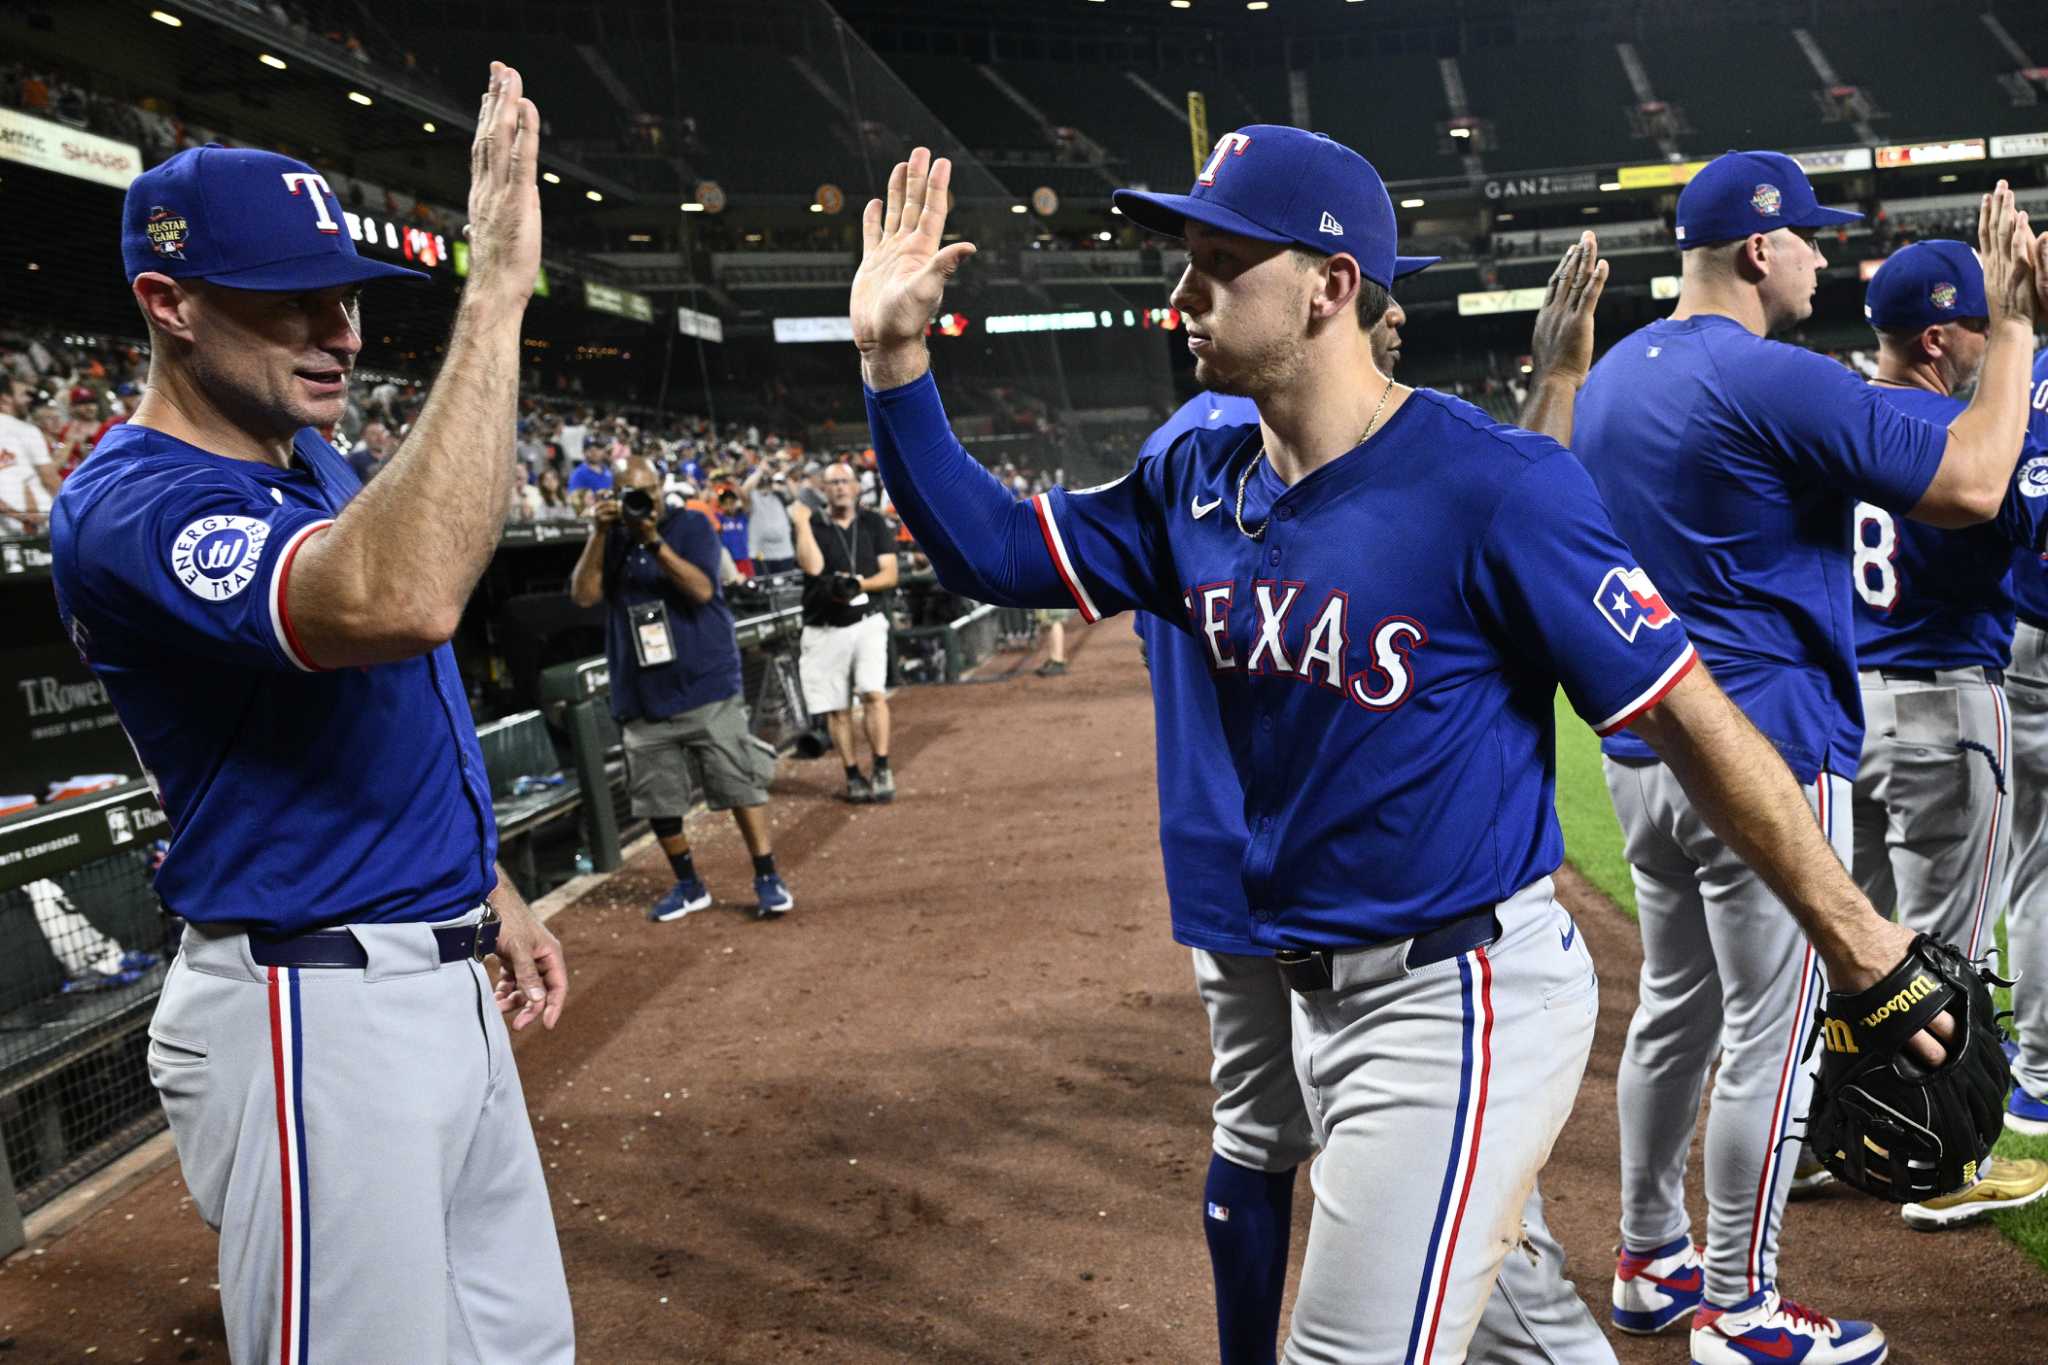 Langford hits for cycle to help Rangers snap 6-game skid with 11-2 win over Orioles